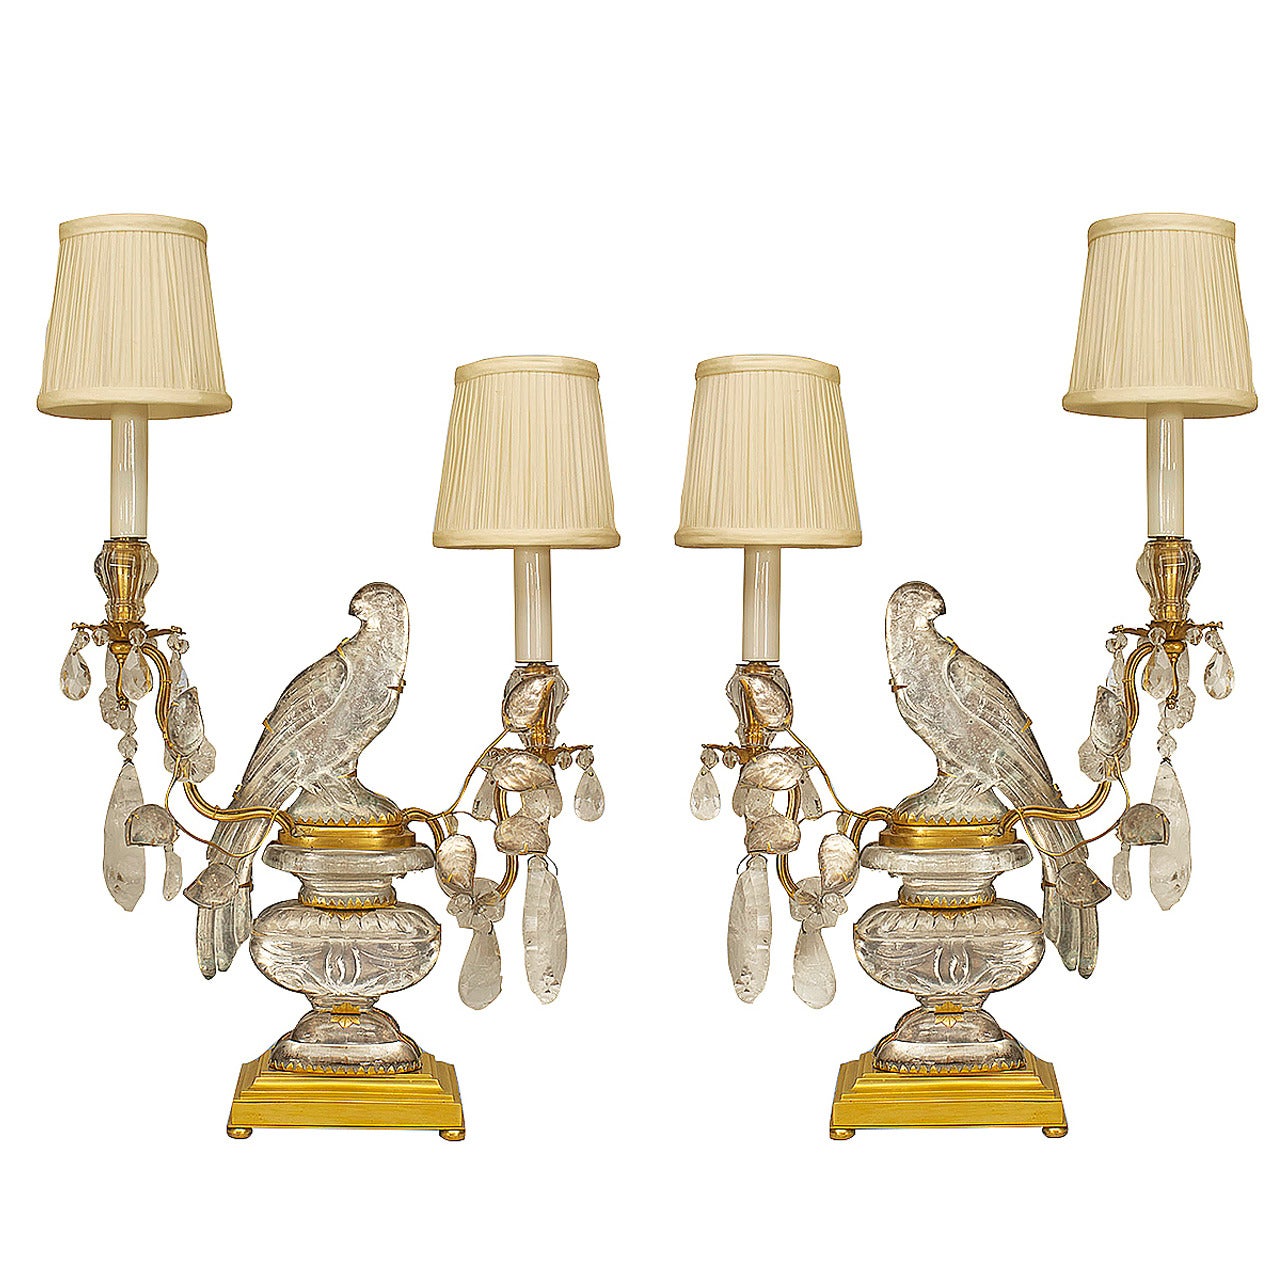 A Lovely Pair of French Crystal Bird Candelabra